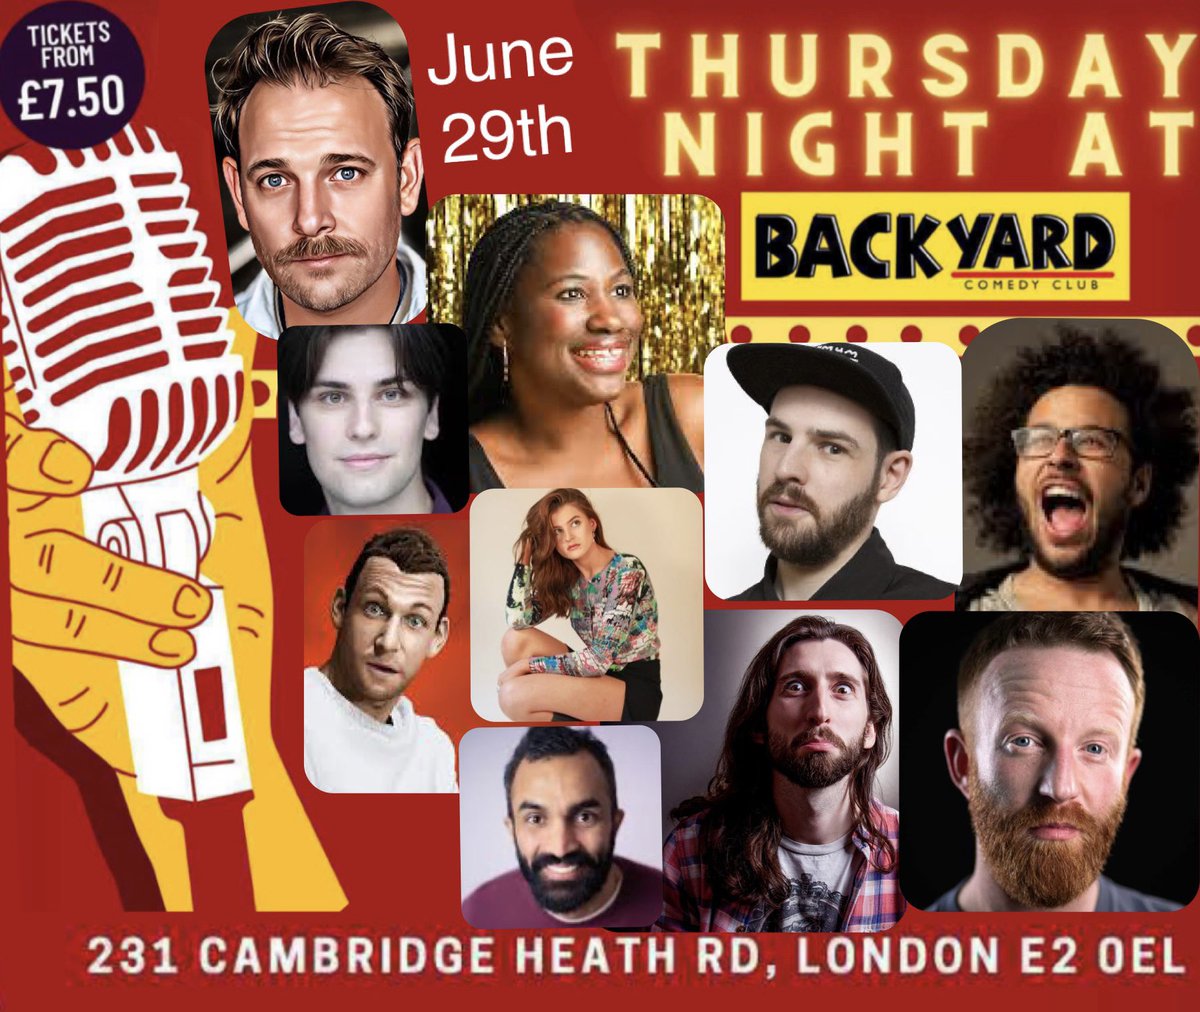 Hugely packed show of hilarious talent this Thursday @FreyaMallard @JayWHandley Joe Jacobs hosted by @DWhitney and special visiting American headliner MEKA MO and more. All for only £7:50 at @Backyard_Comedy backyardcomedyclub.co.uk/event/backyard…